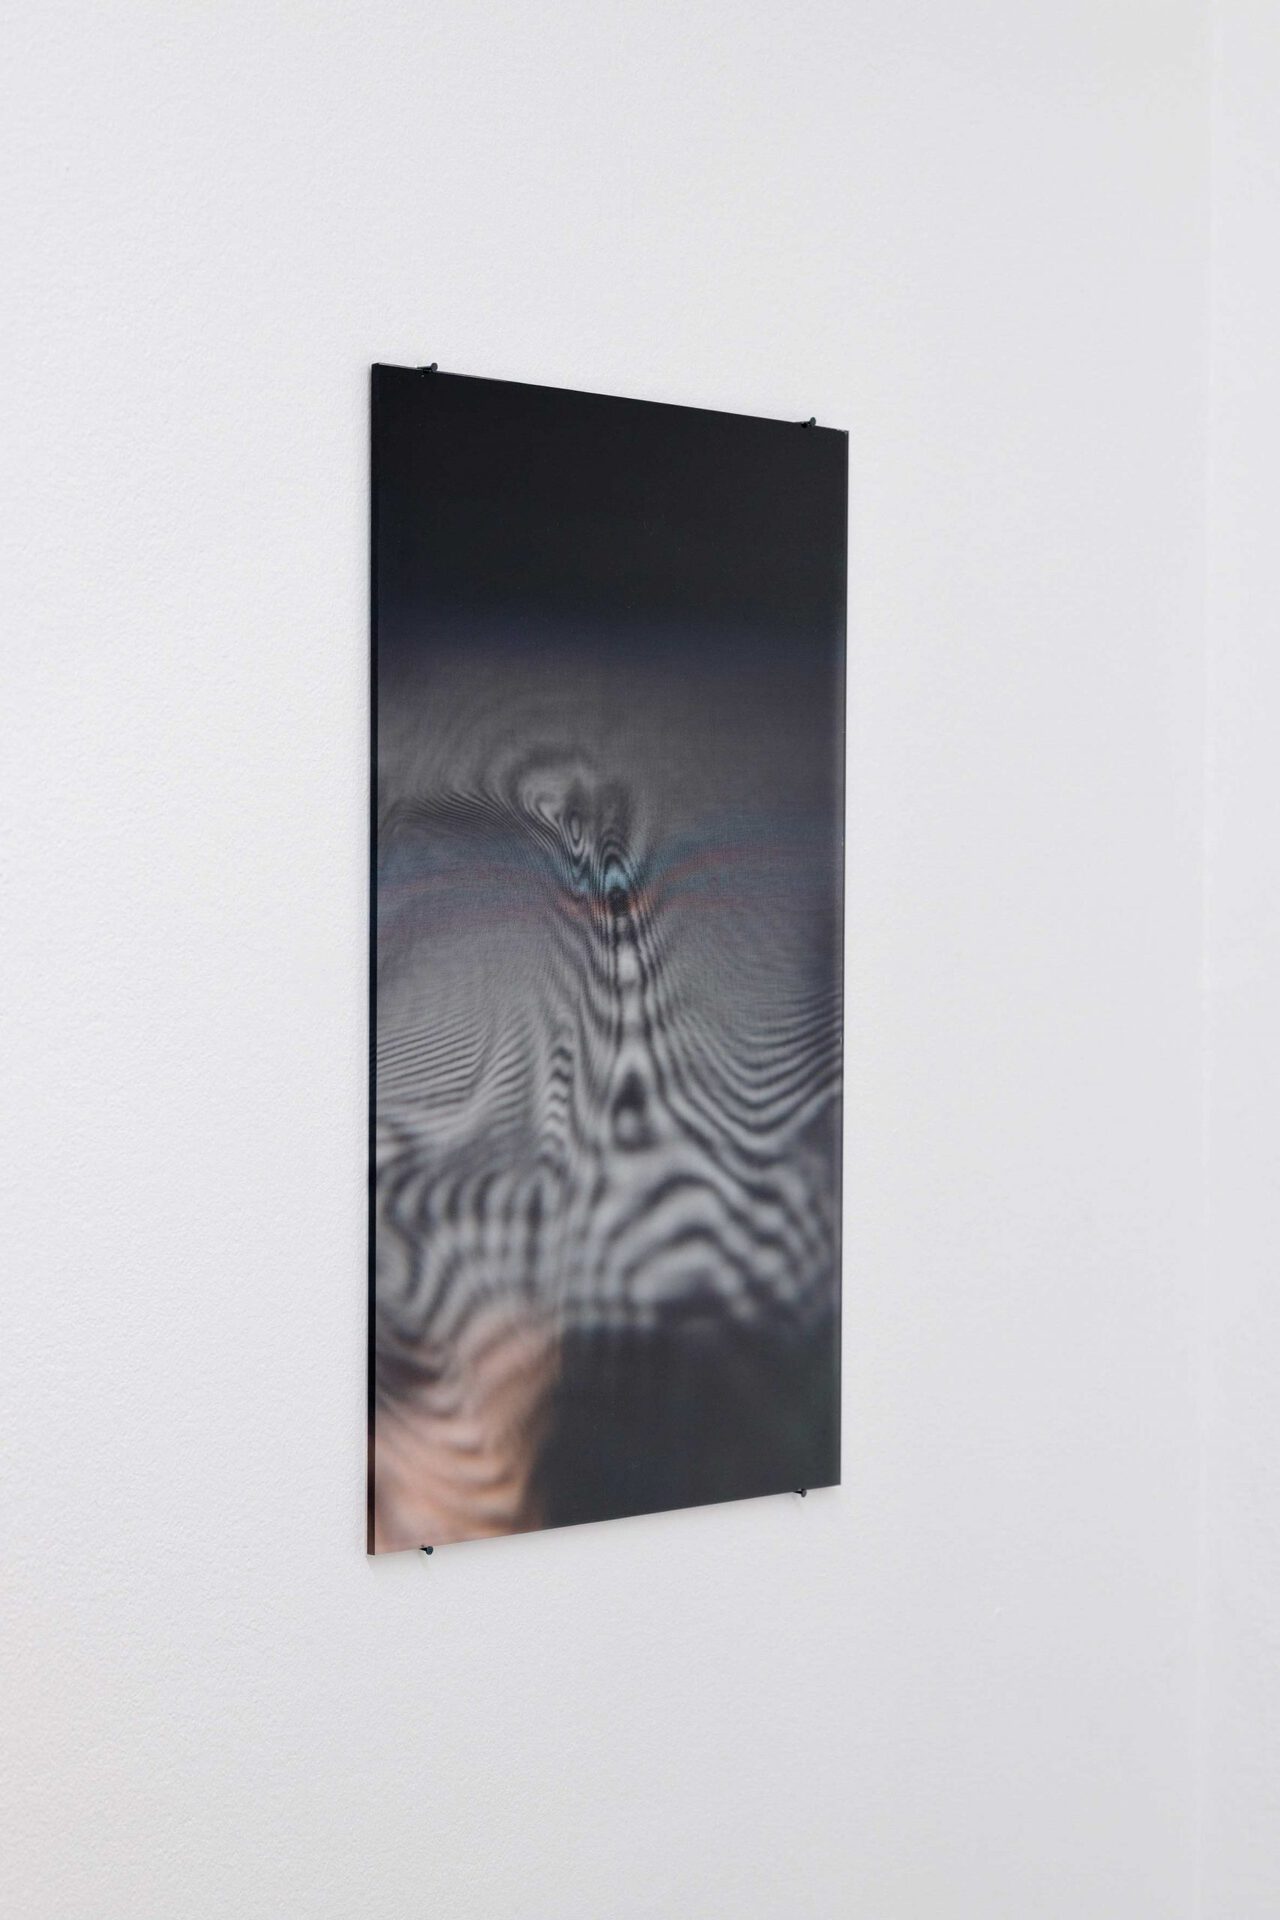 Nadia Guerroui, Friction in Plain Sight II, 2020, ambient light, glass (35 x 53 cm), polished varnish and nails, dimensions variable, ed. of 3.